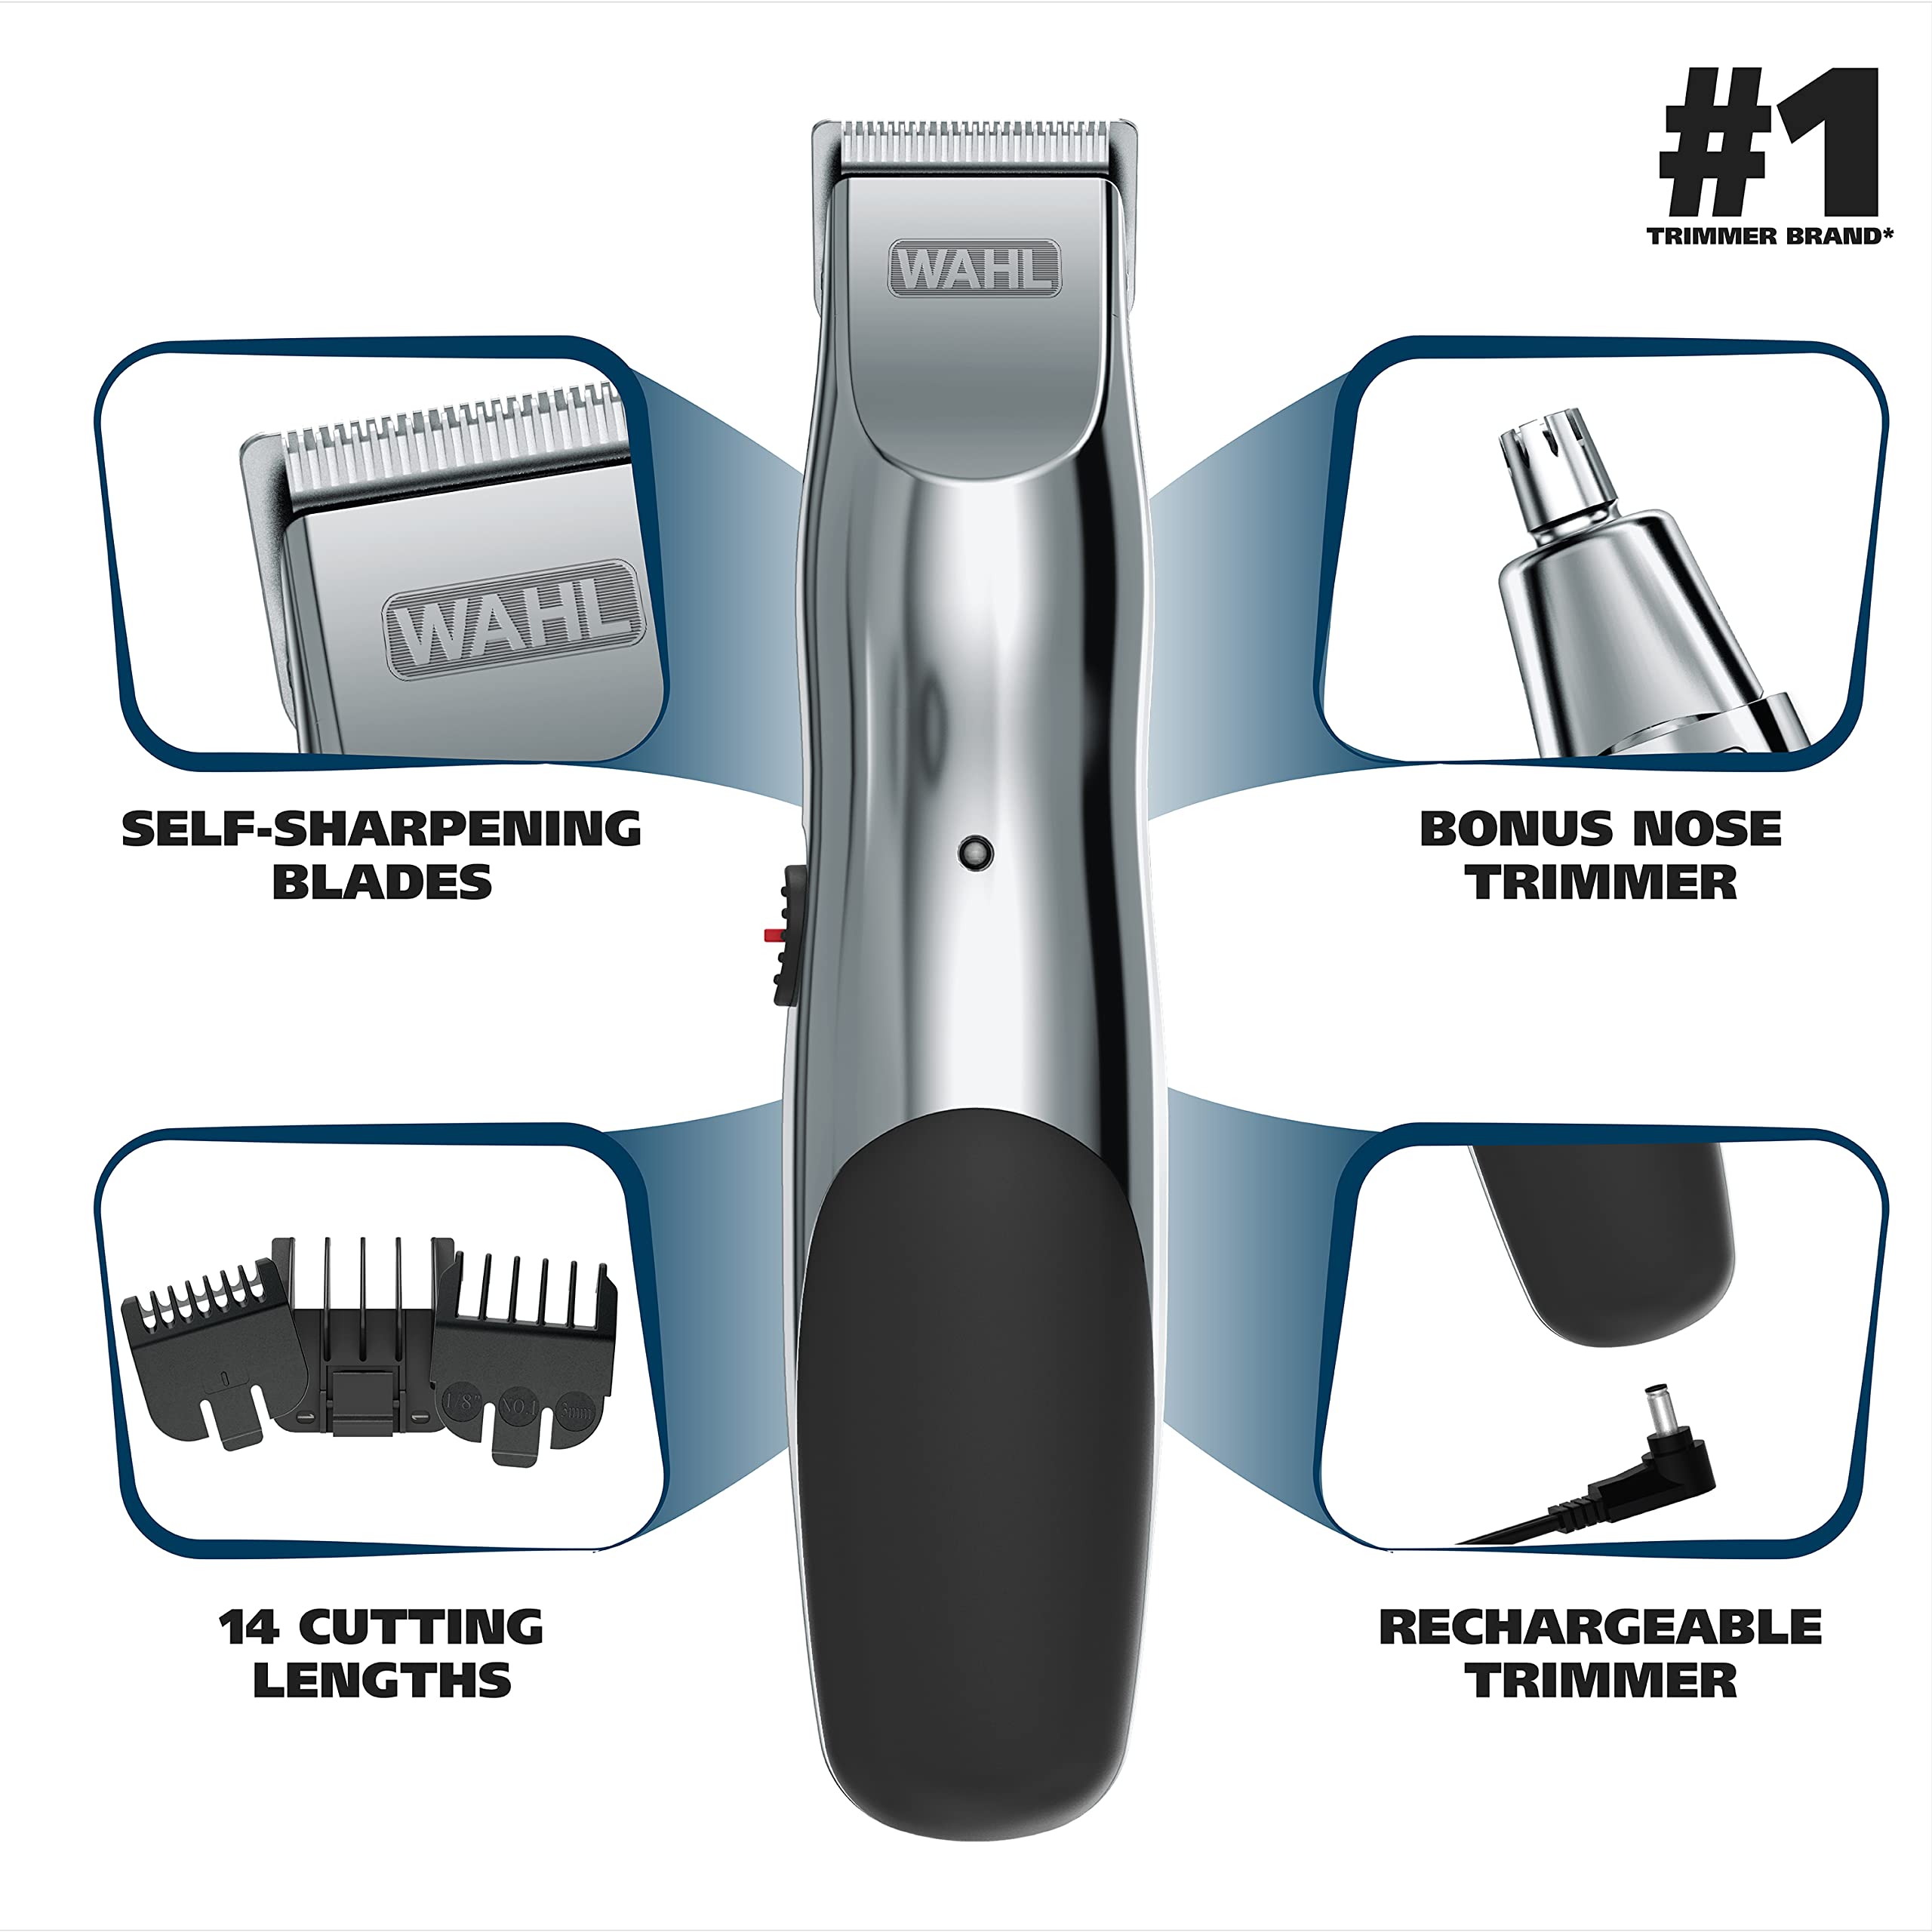 WAHL Groomsman Rechargeable Beard Trimmer kit for Mustaches, Nose Hair, and Light Detailing and Grooming with Bonus Wet/Dry Electric Nose Trimmer – Model 5622v